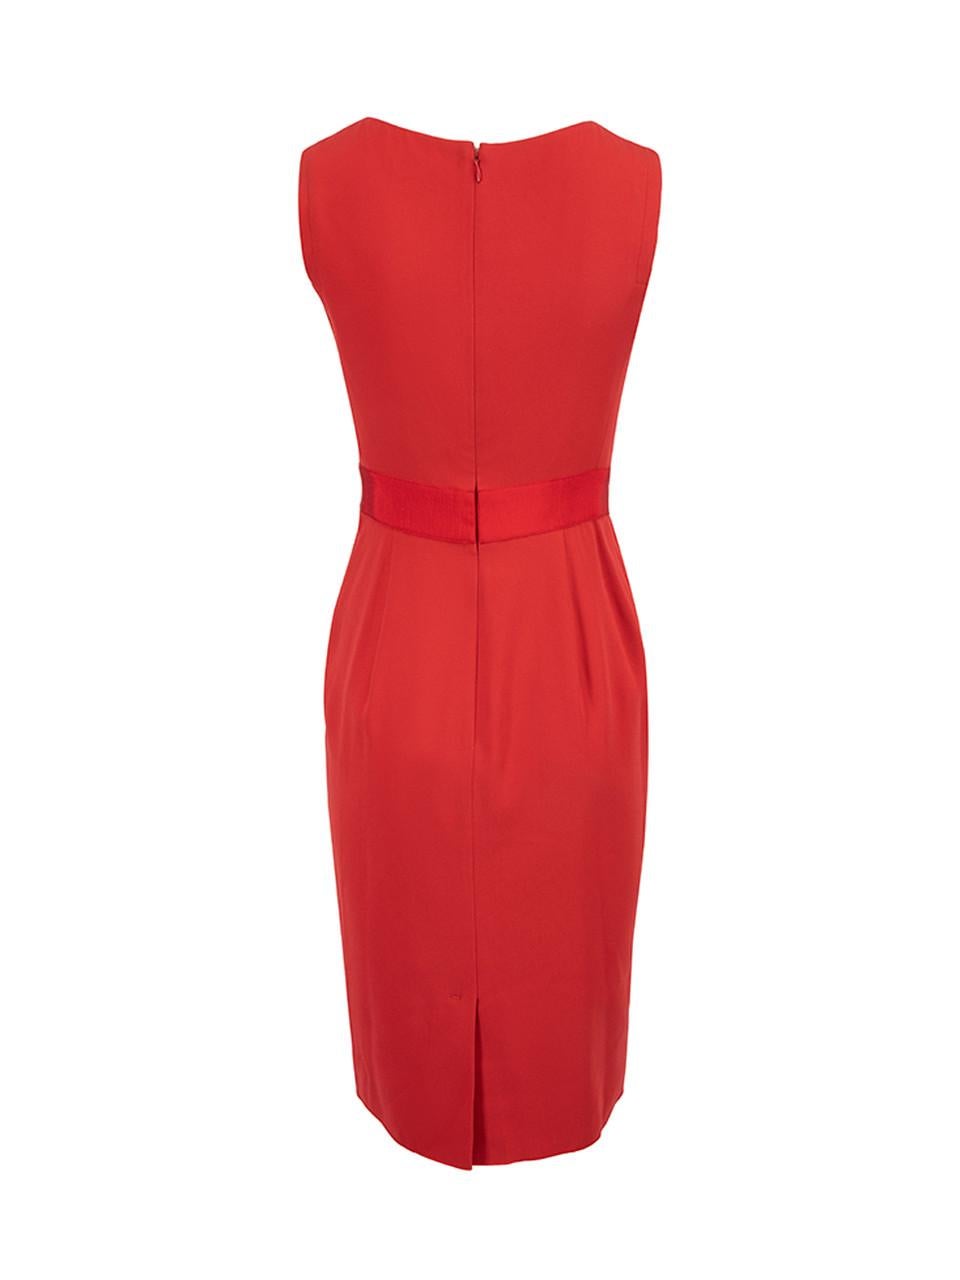 Red Sleeveless Pleated Detail Dress Size M In Good Condition For Sale In London, GB